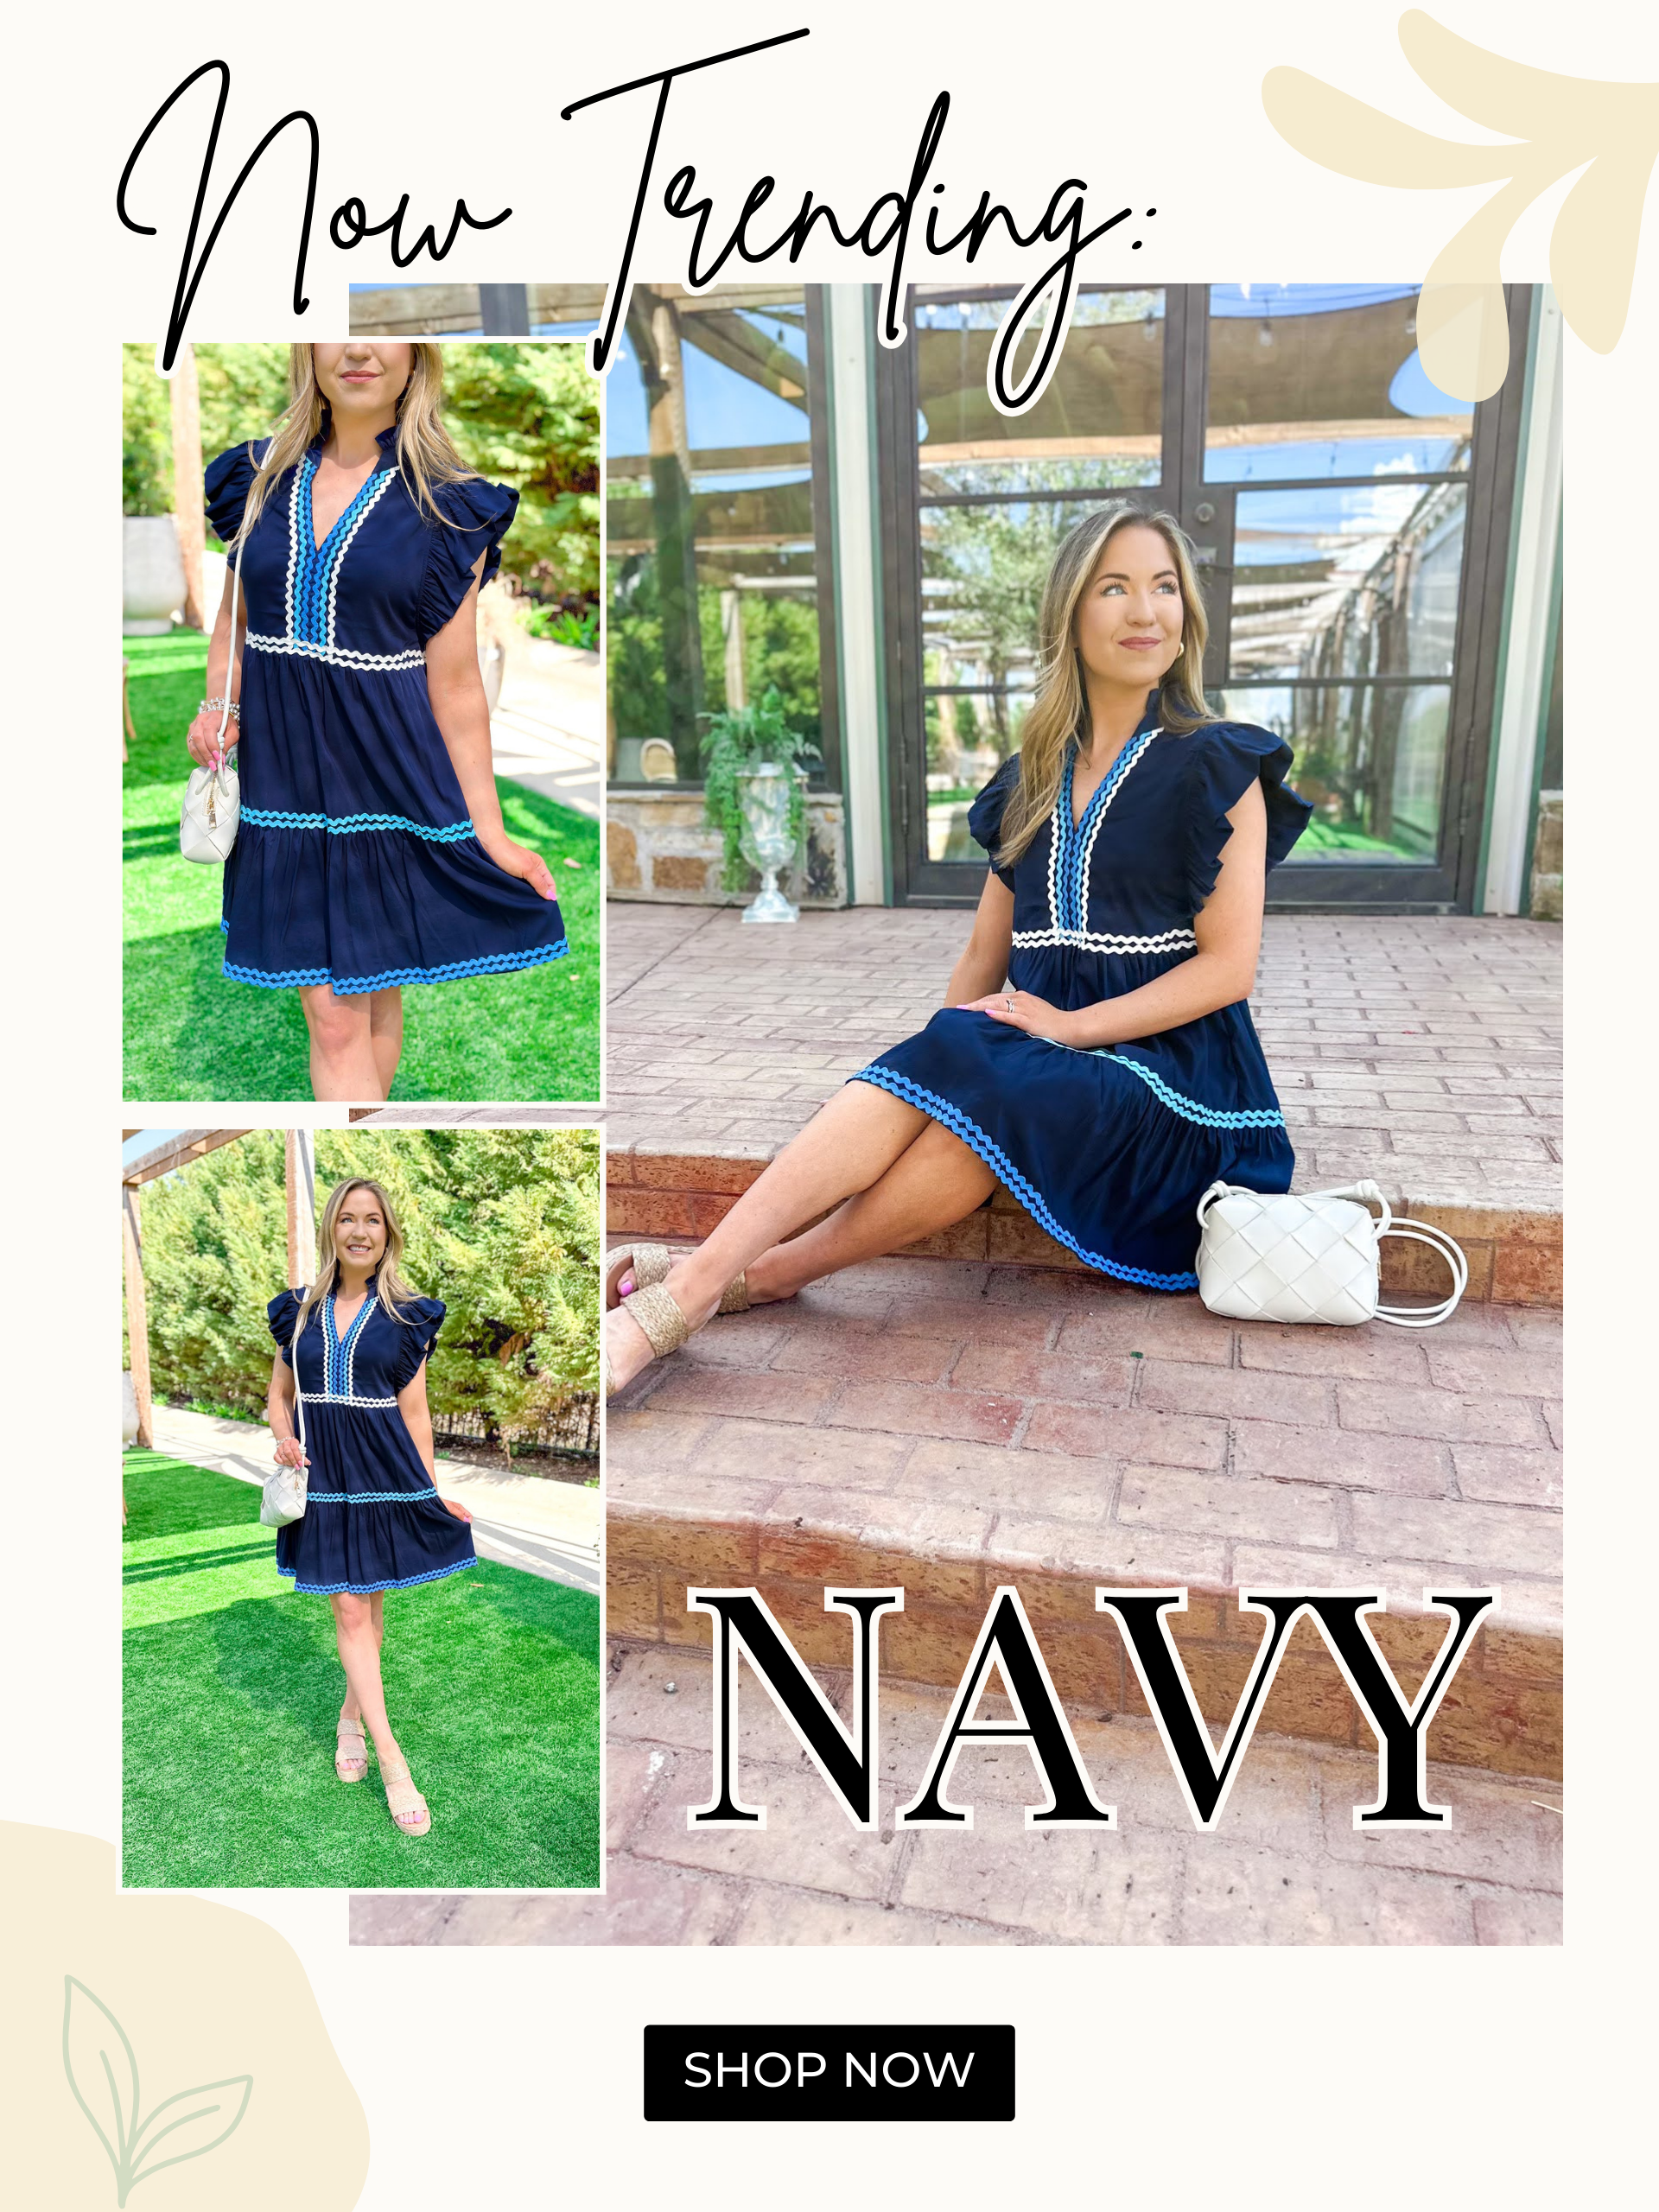 Now trending: navy. Shop now. Model is wearing a navy mini dress with ruffle detail over the shoulder and rick and rack in different shades of blue and white. Styled with a white woven faux leather handbag and raffia platform shoes.